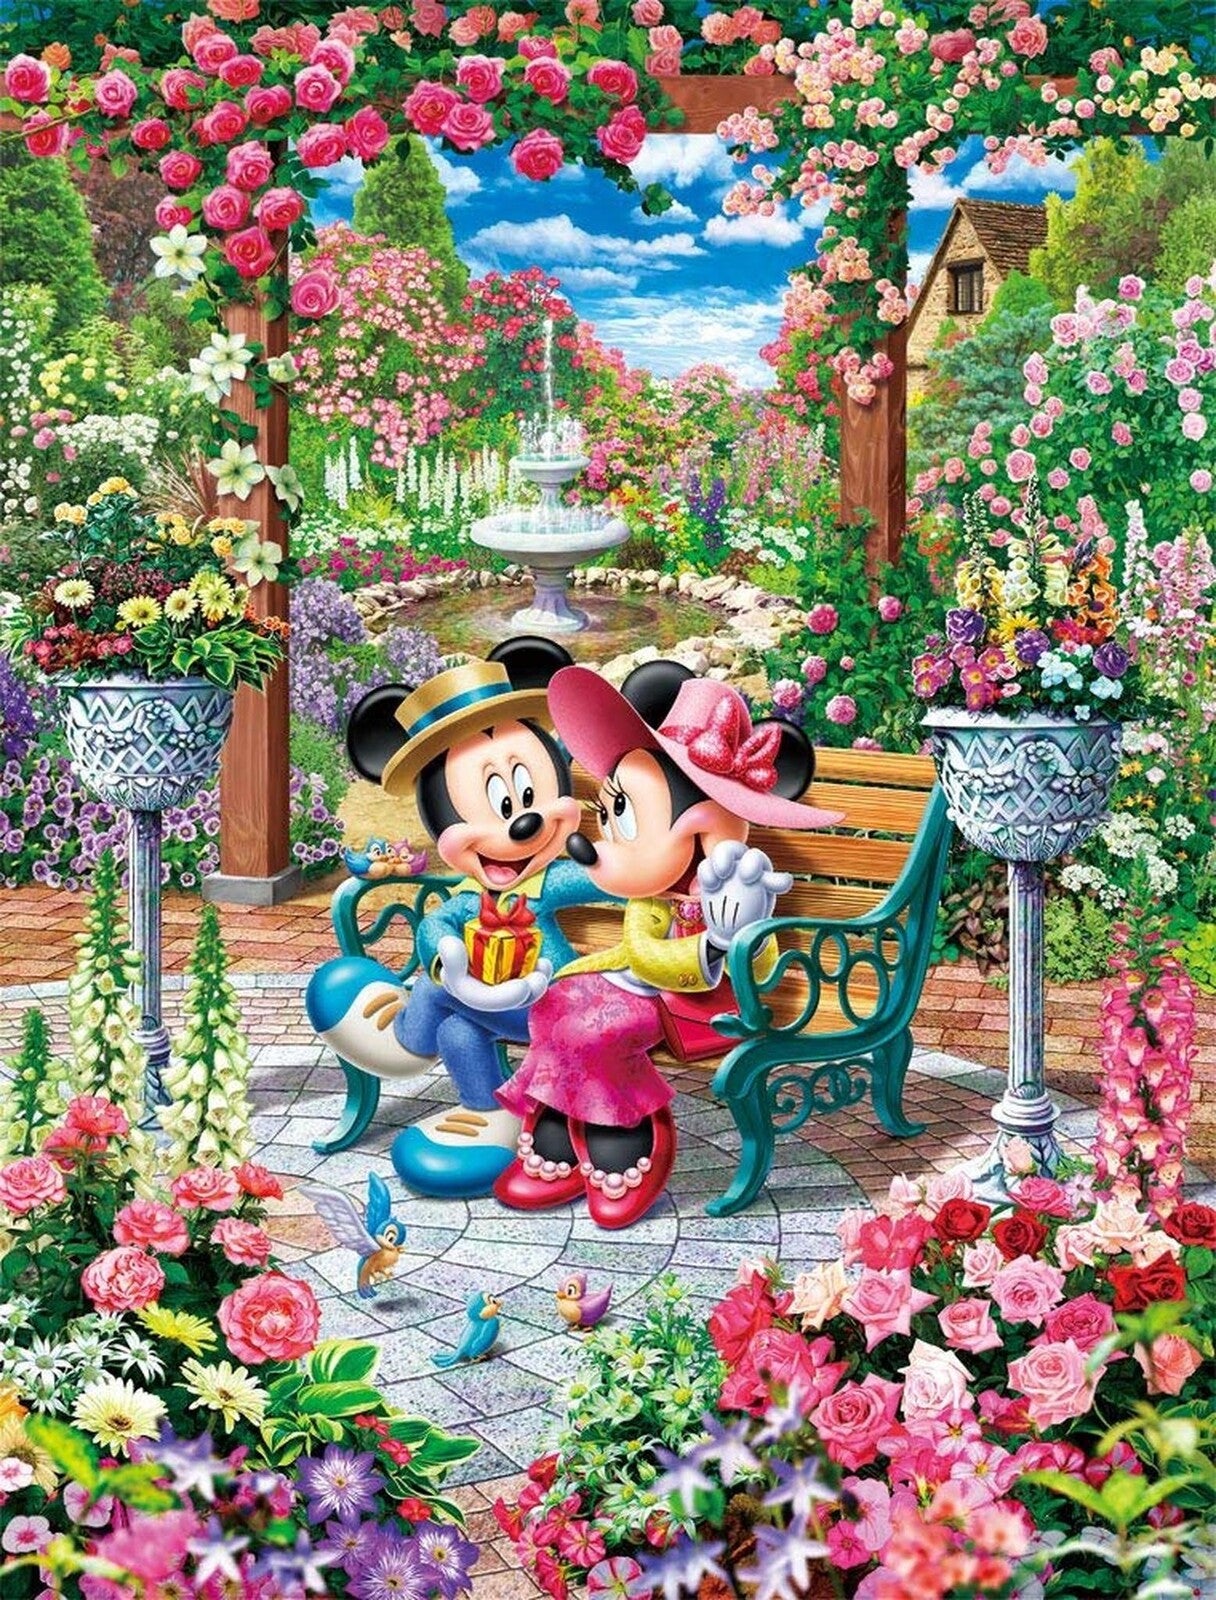 Tenyo Puzzle 500pc - Disney Mickey and Minnie - Blooming Love Royal Garden